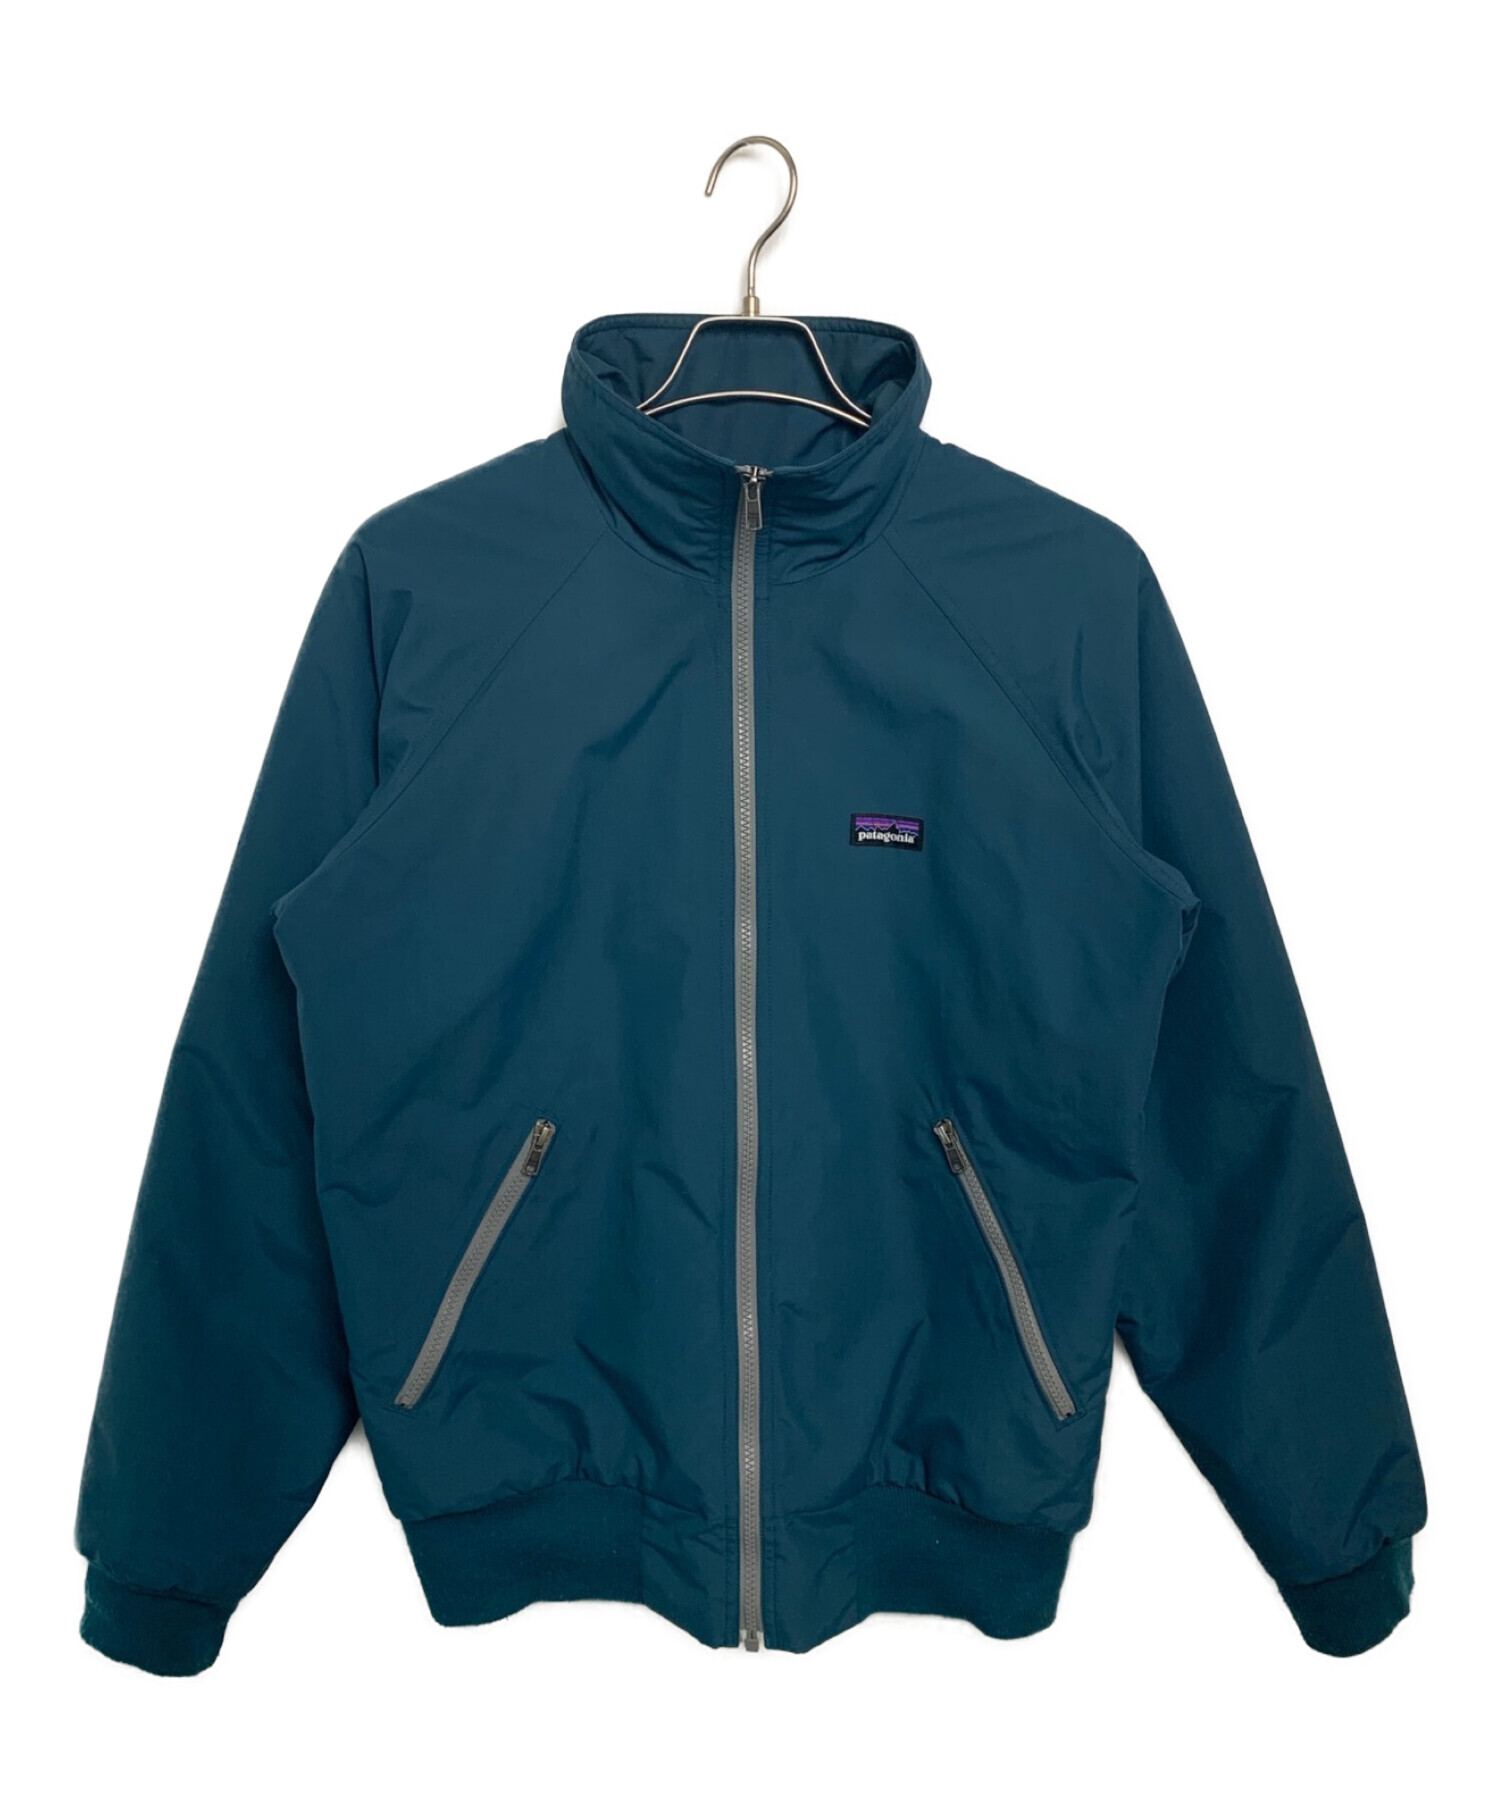 coloPatagonia jacket  size S